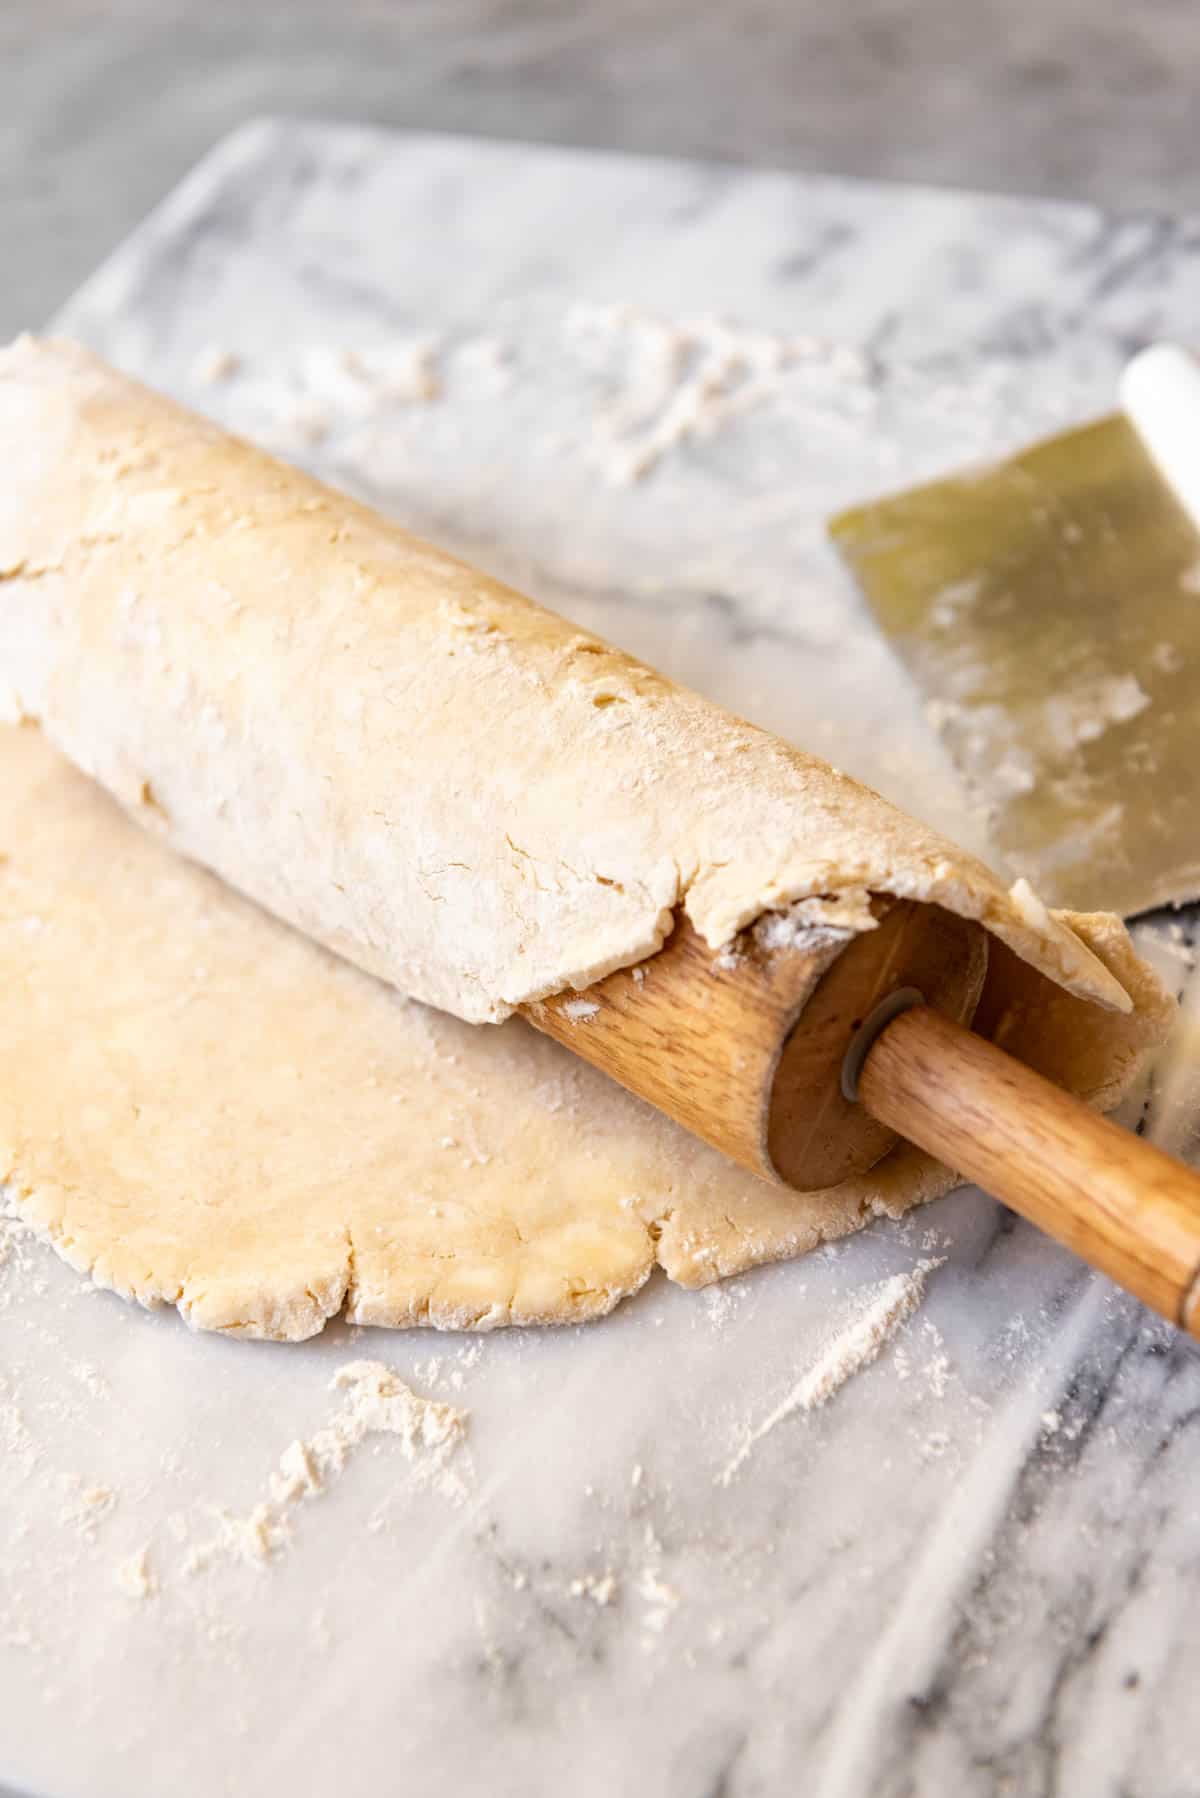 An image of an unbaked pie crust rolled onto a rolling pin to transfer to a pie plate.